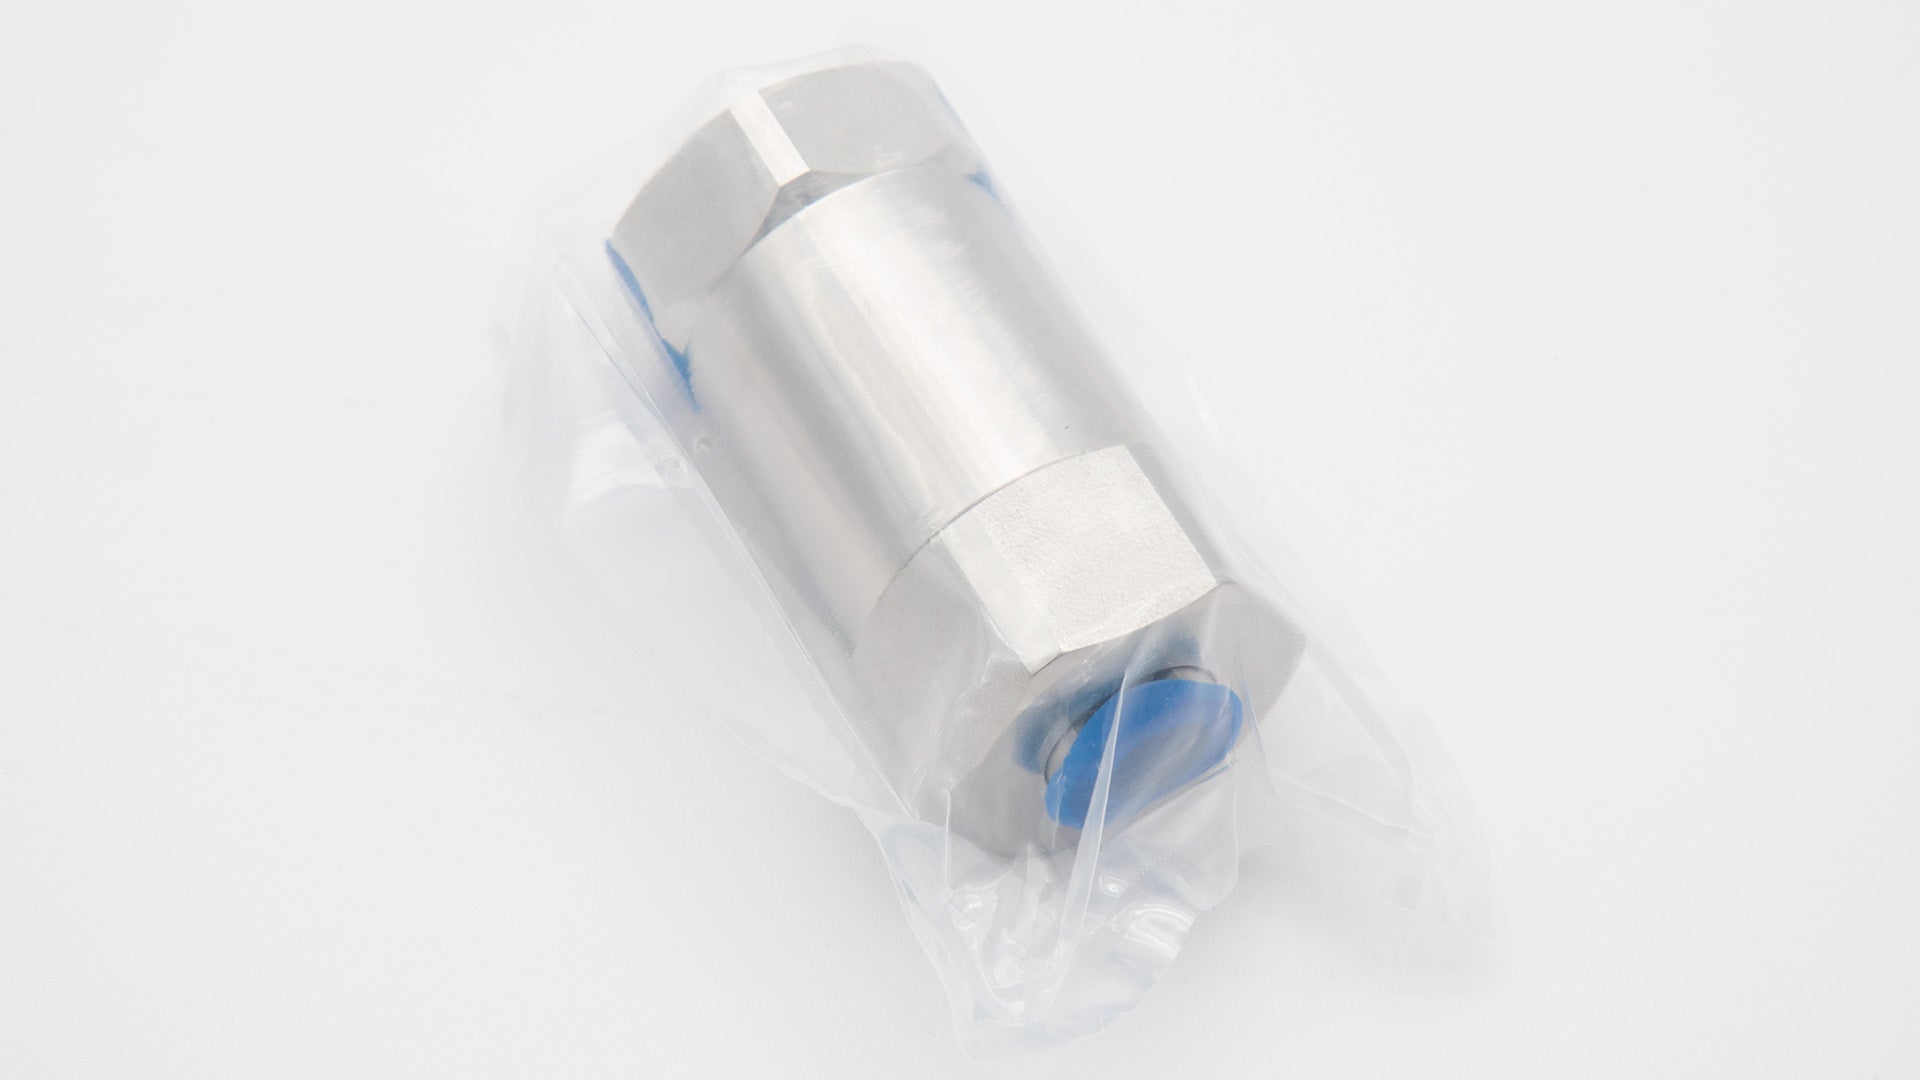 A silver cylinder in a plastic bag